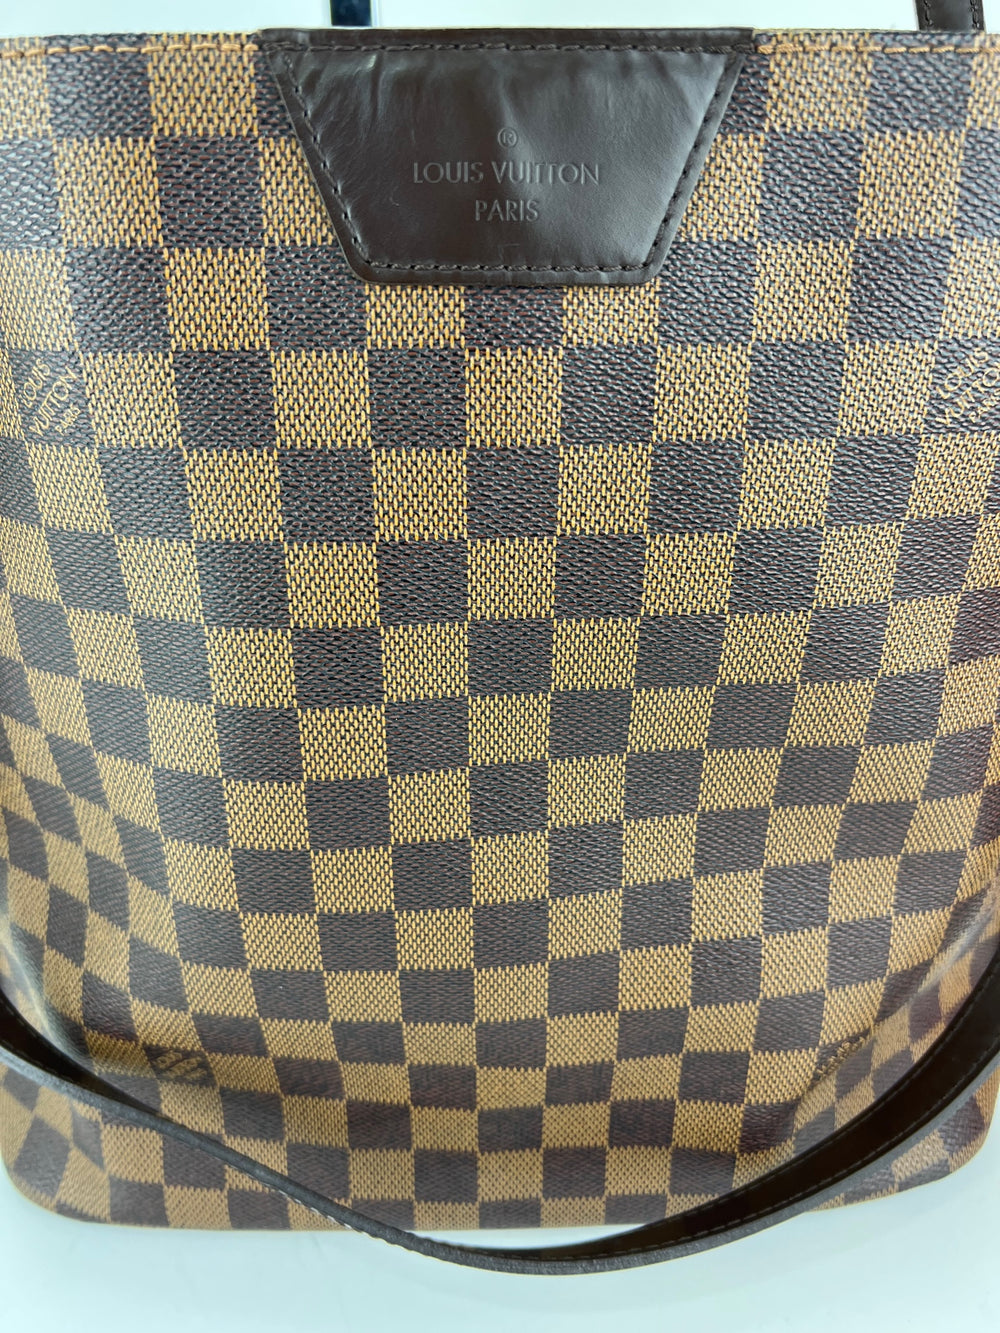 Beautiful Louis Vuitton Cabas Rivington tote. Swipe to see more photos.  This item is consigned therefore store credit is not applicable.